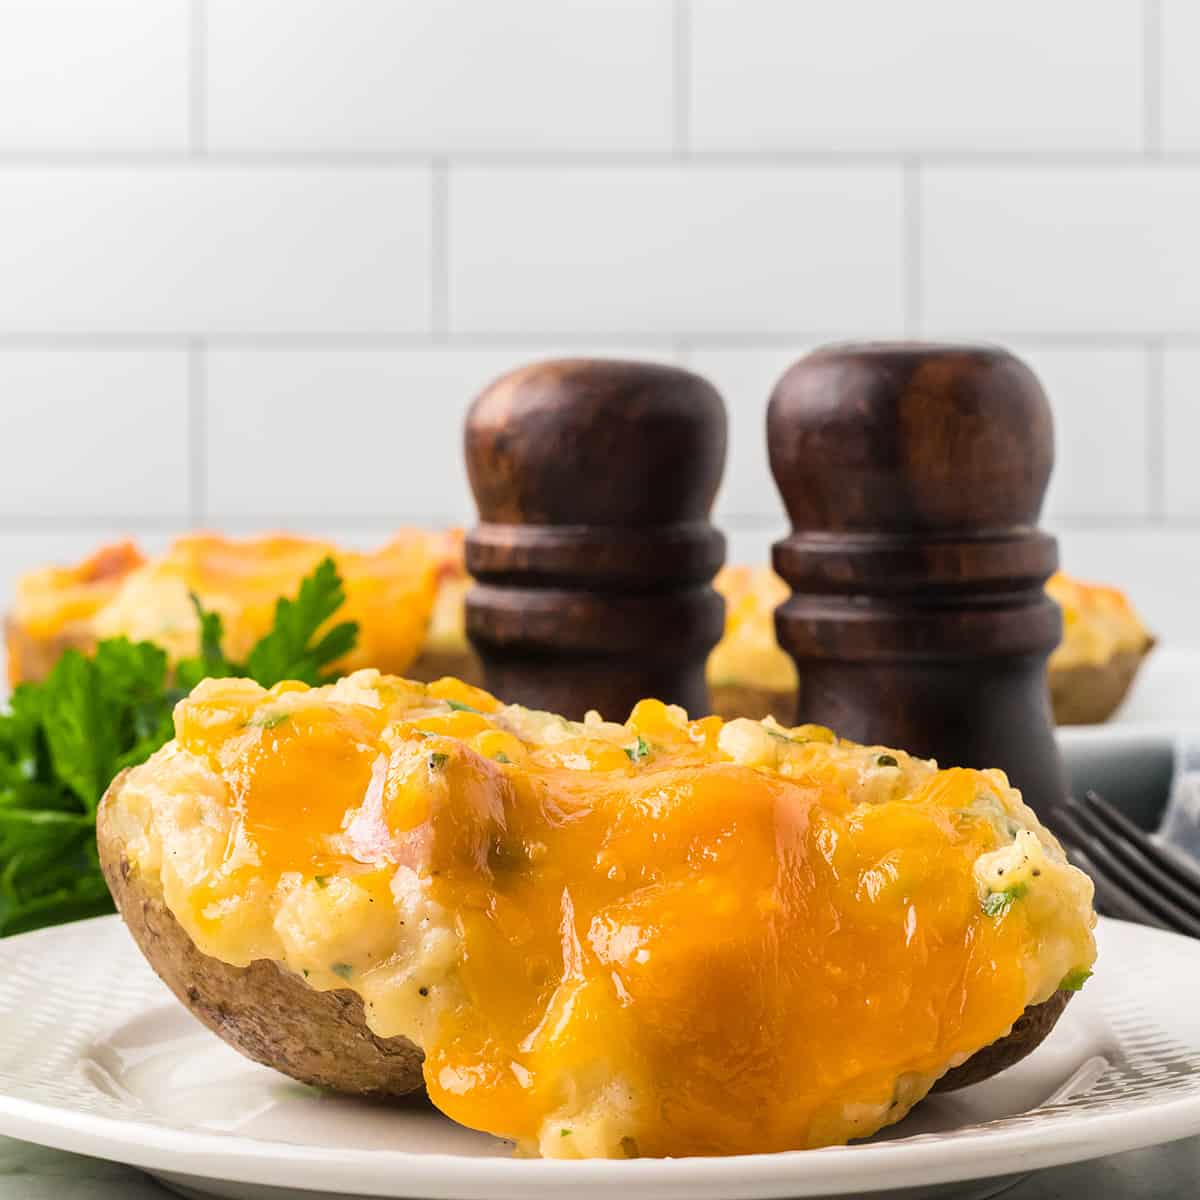 A serving of ham and cheese stuffed potatoes on a white plate.